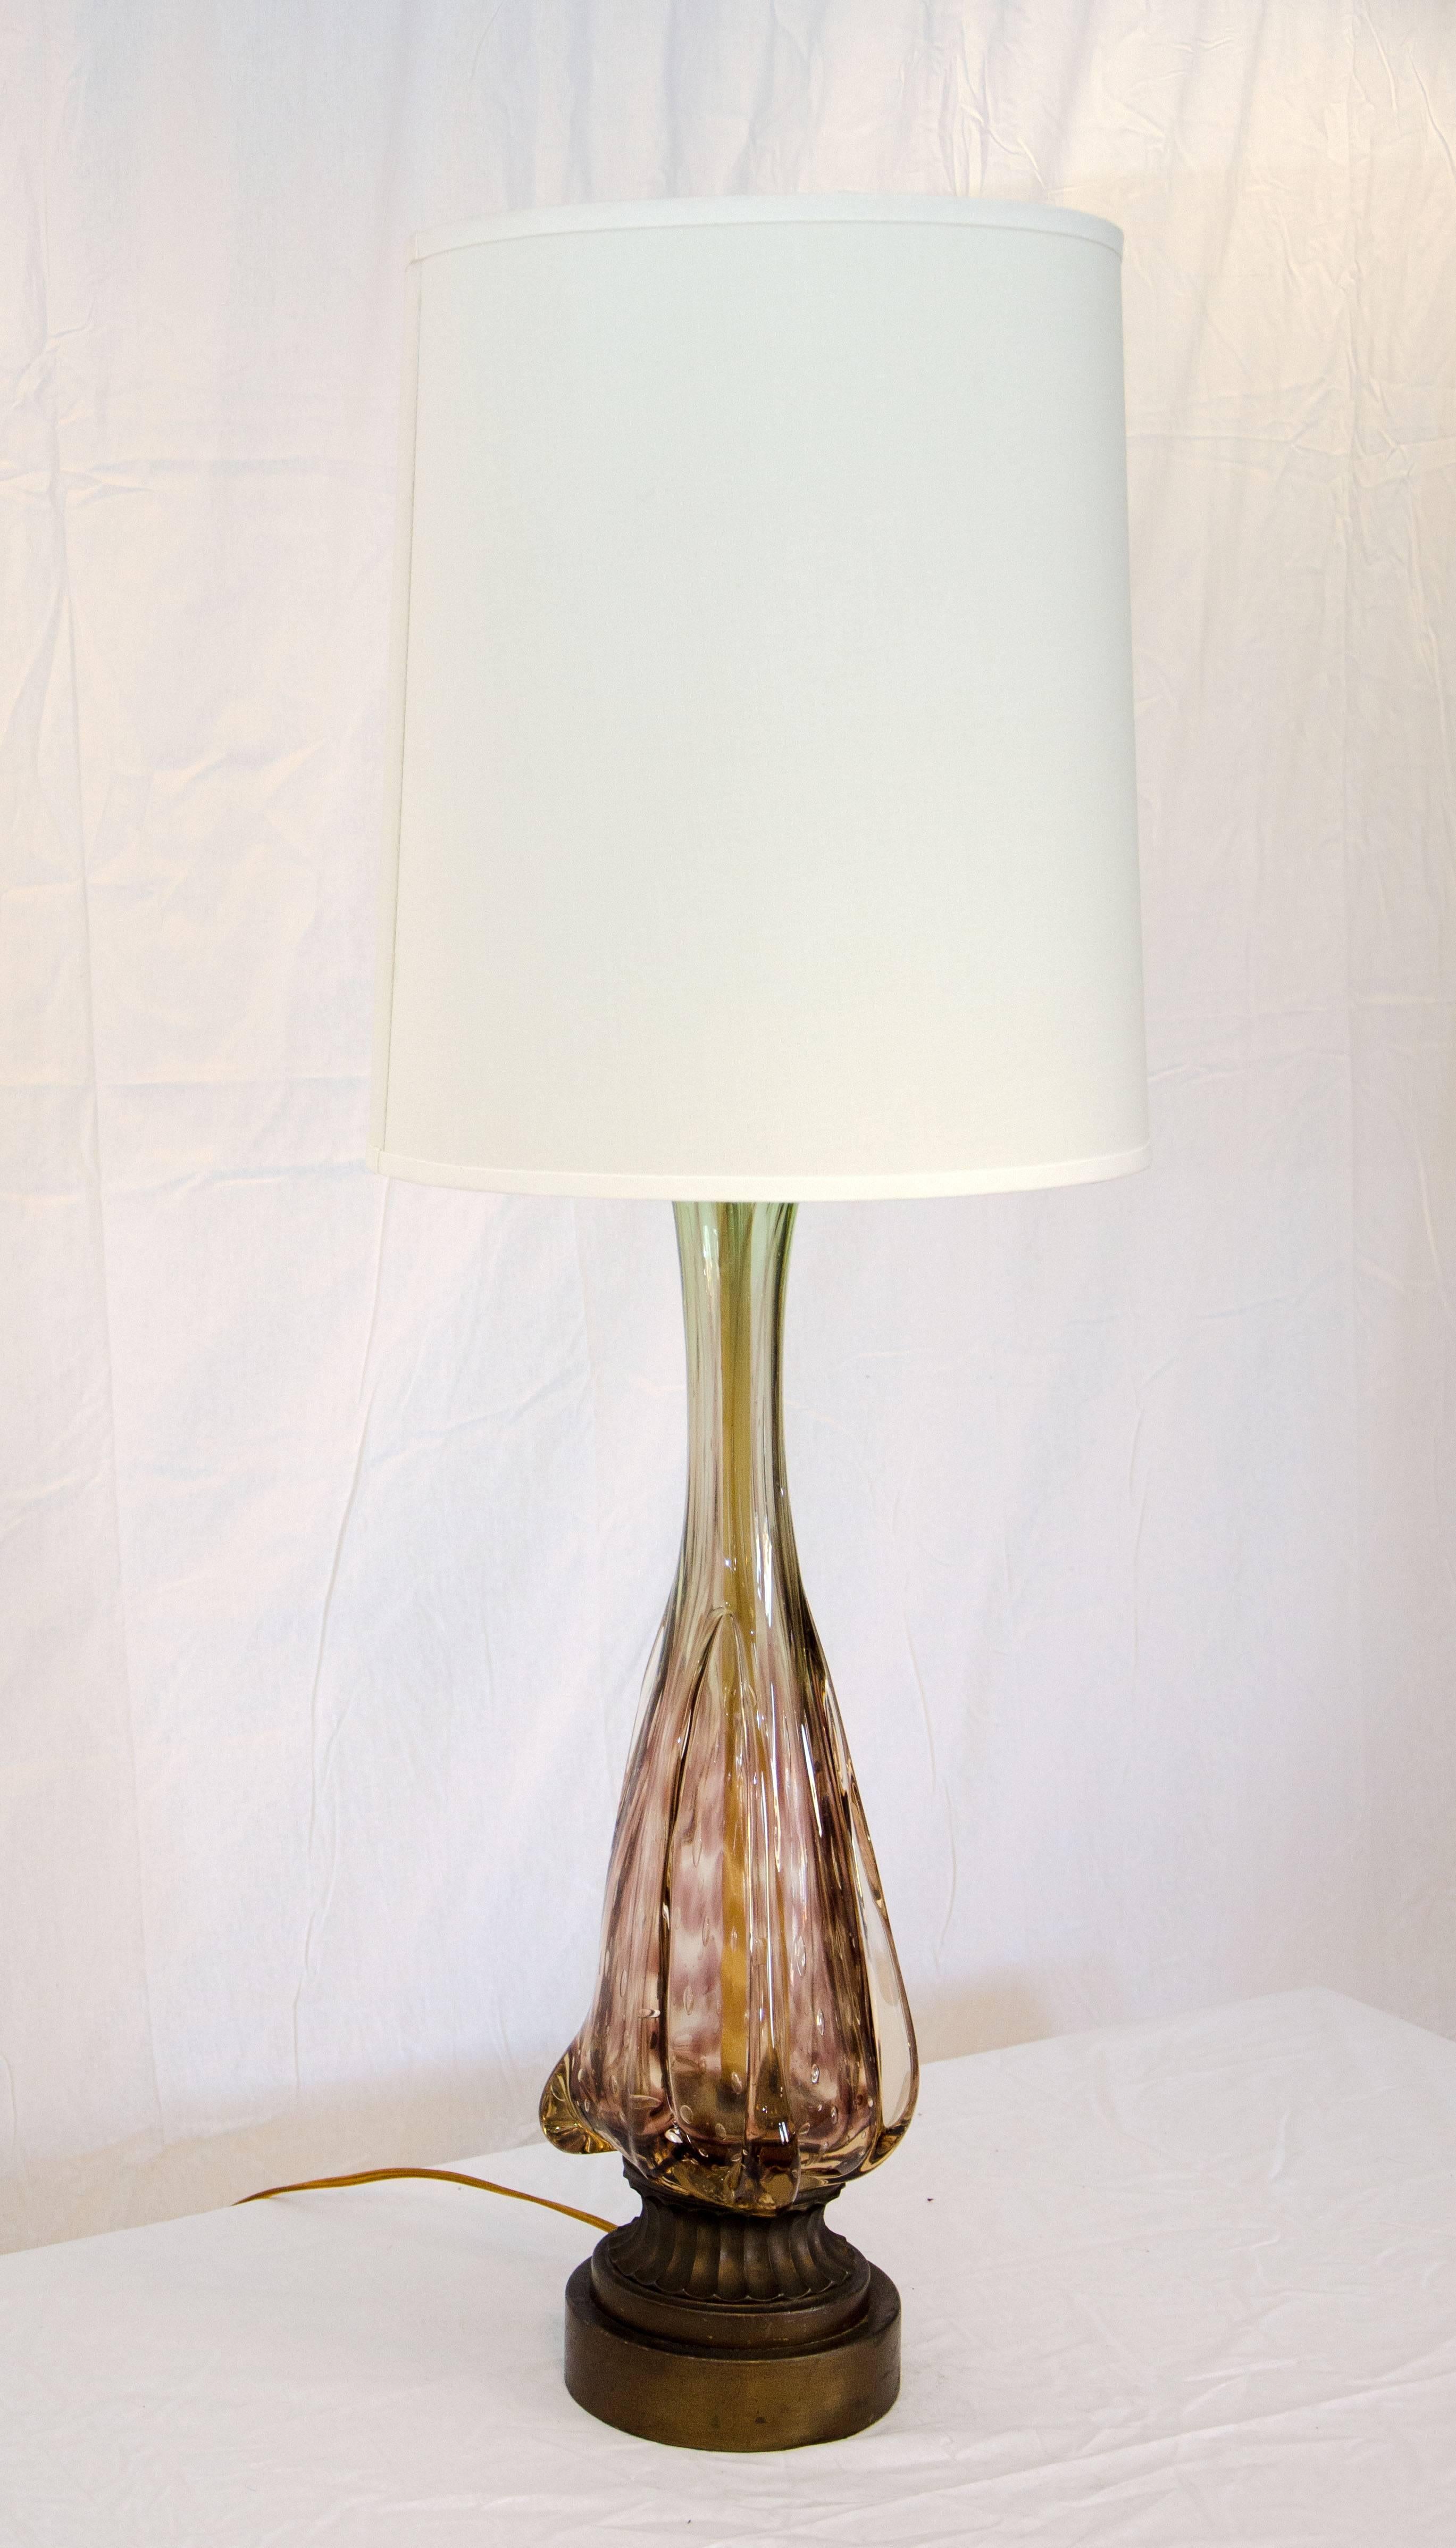 Murano style glass base tall table lamp on a 4 1/2